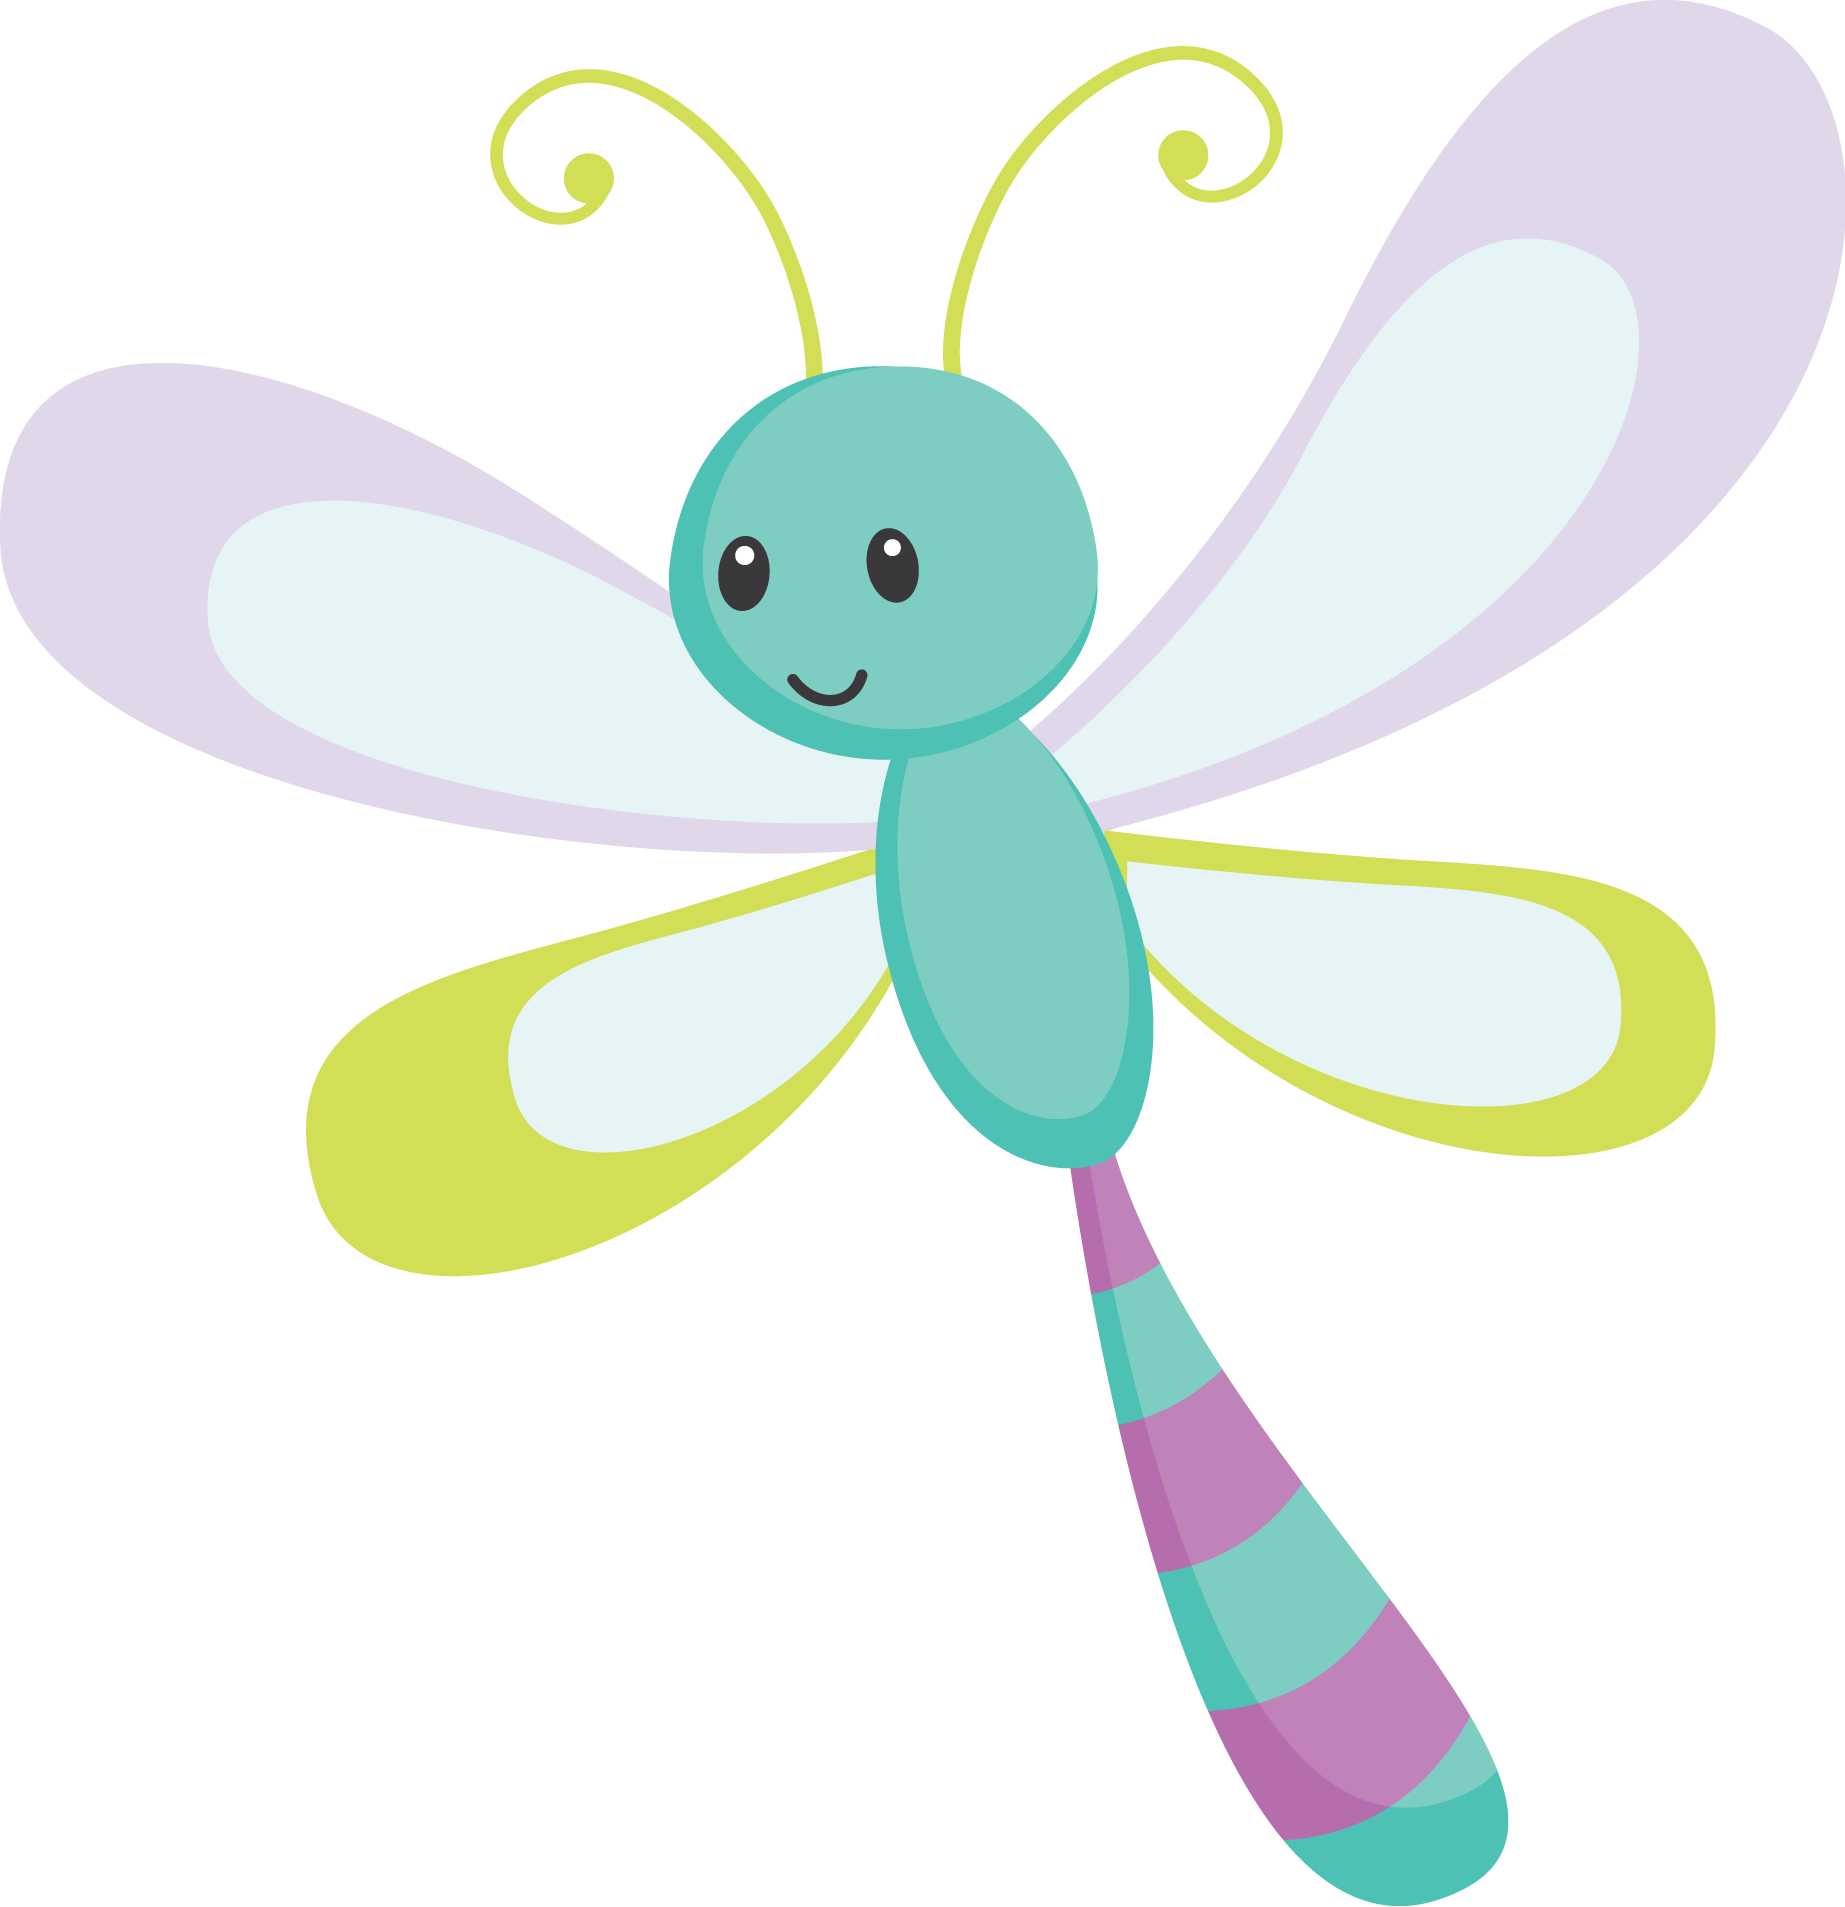  ugs mundo dos. Dragonfly clipart small dragonfly